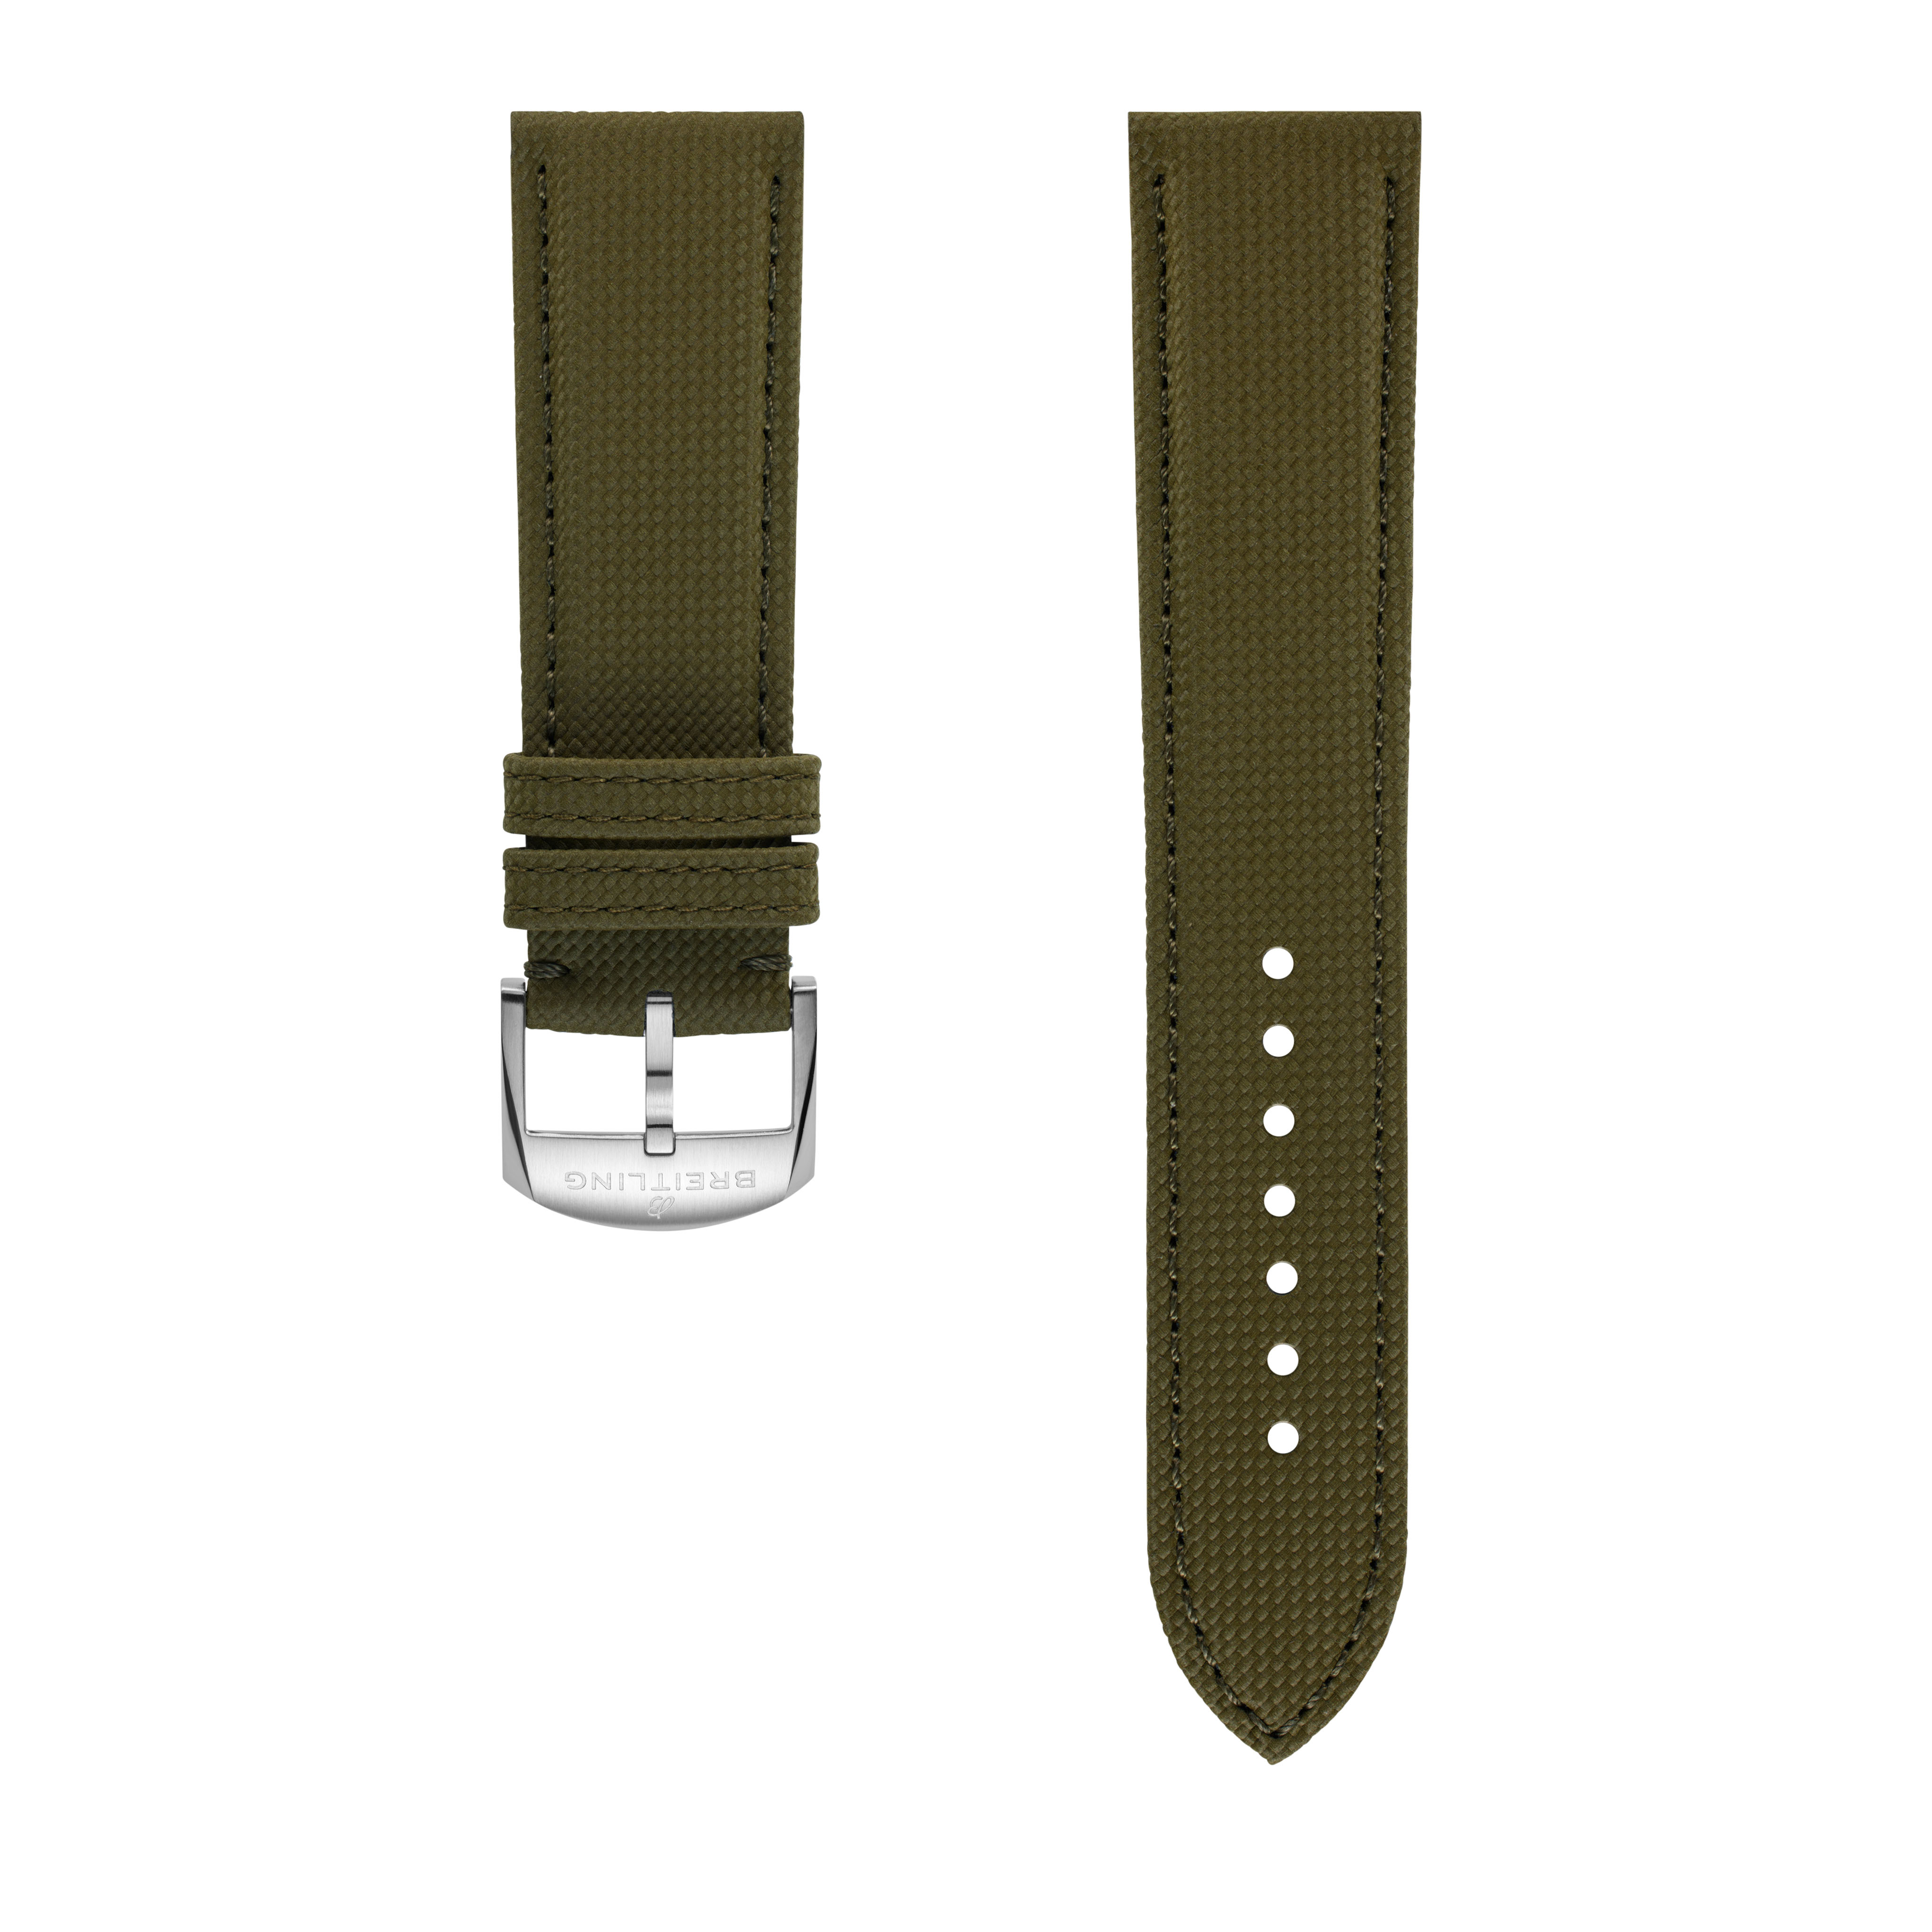 Green military calfskin leather strap - 22 mm